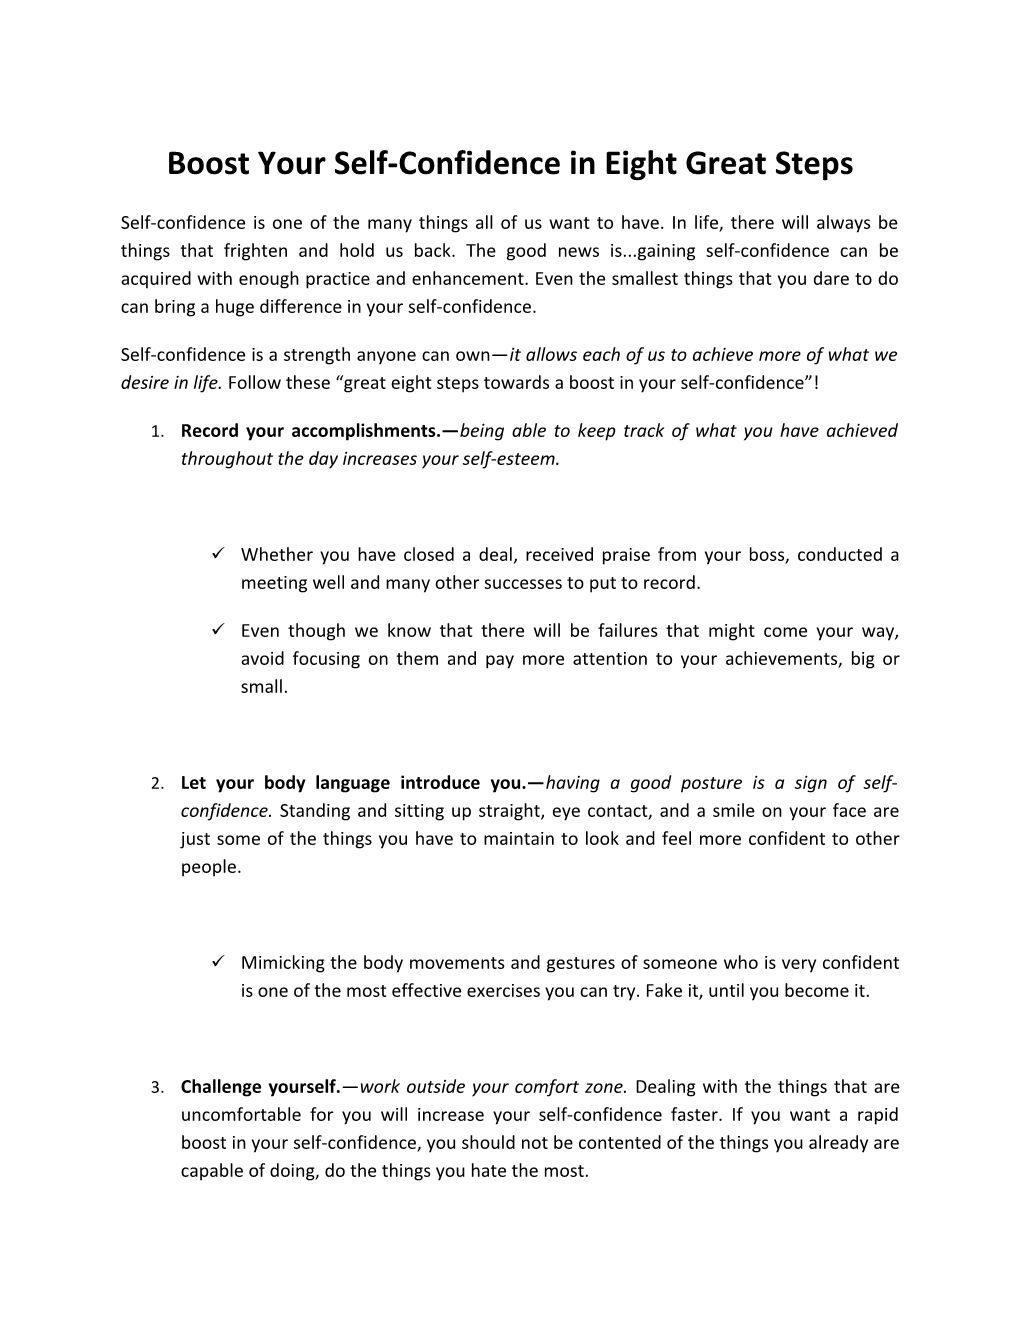 Boost Your Self-Confidence in Eight Great Steps